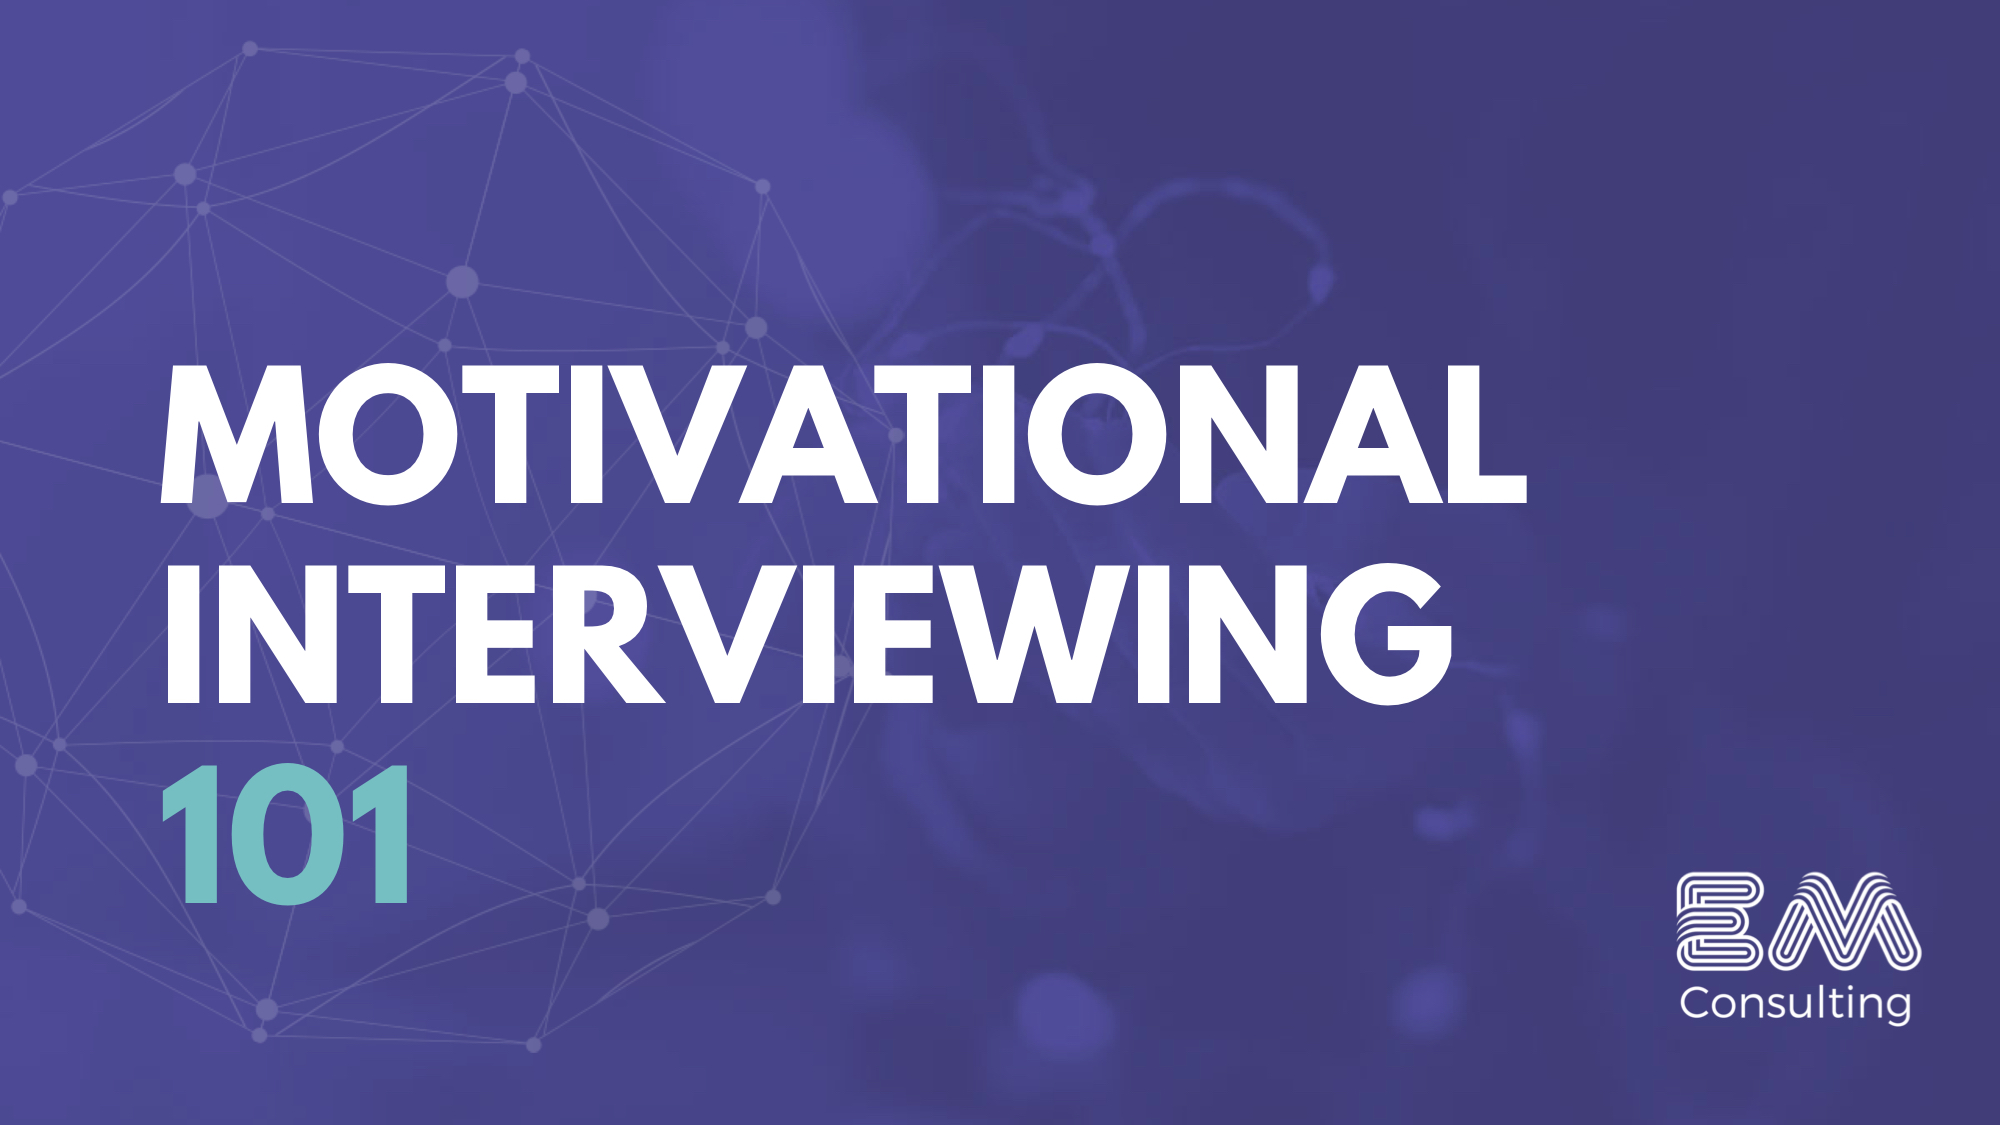 research on motivational interviewing